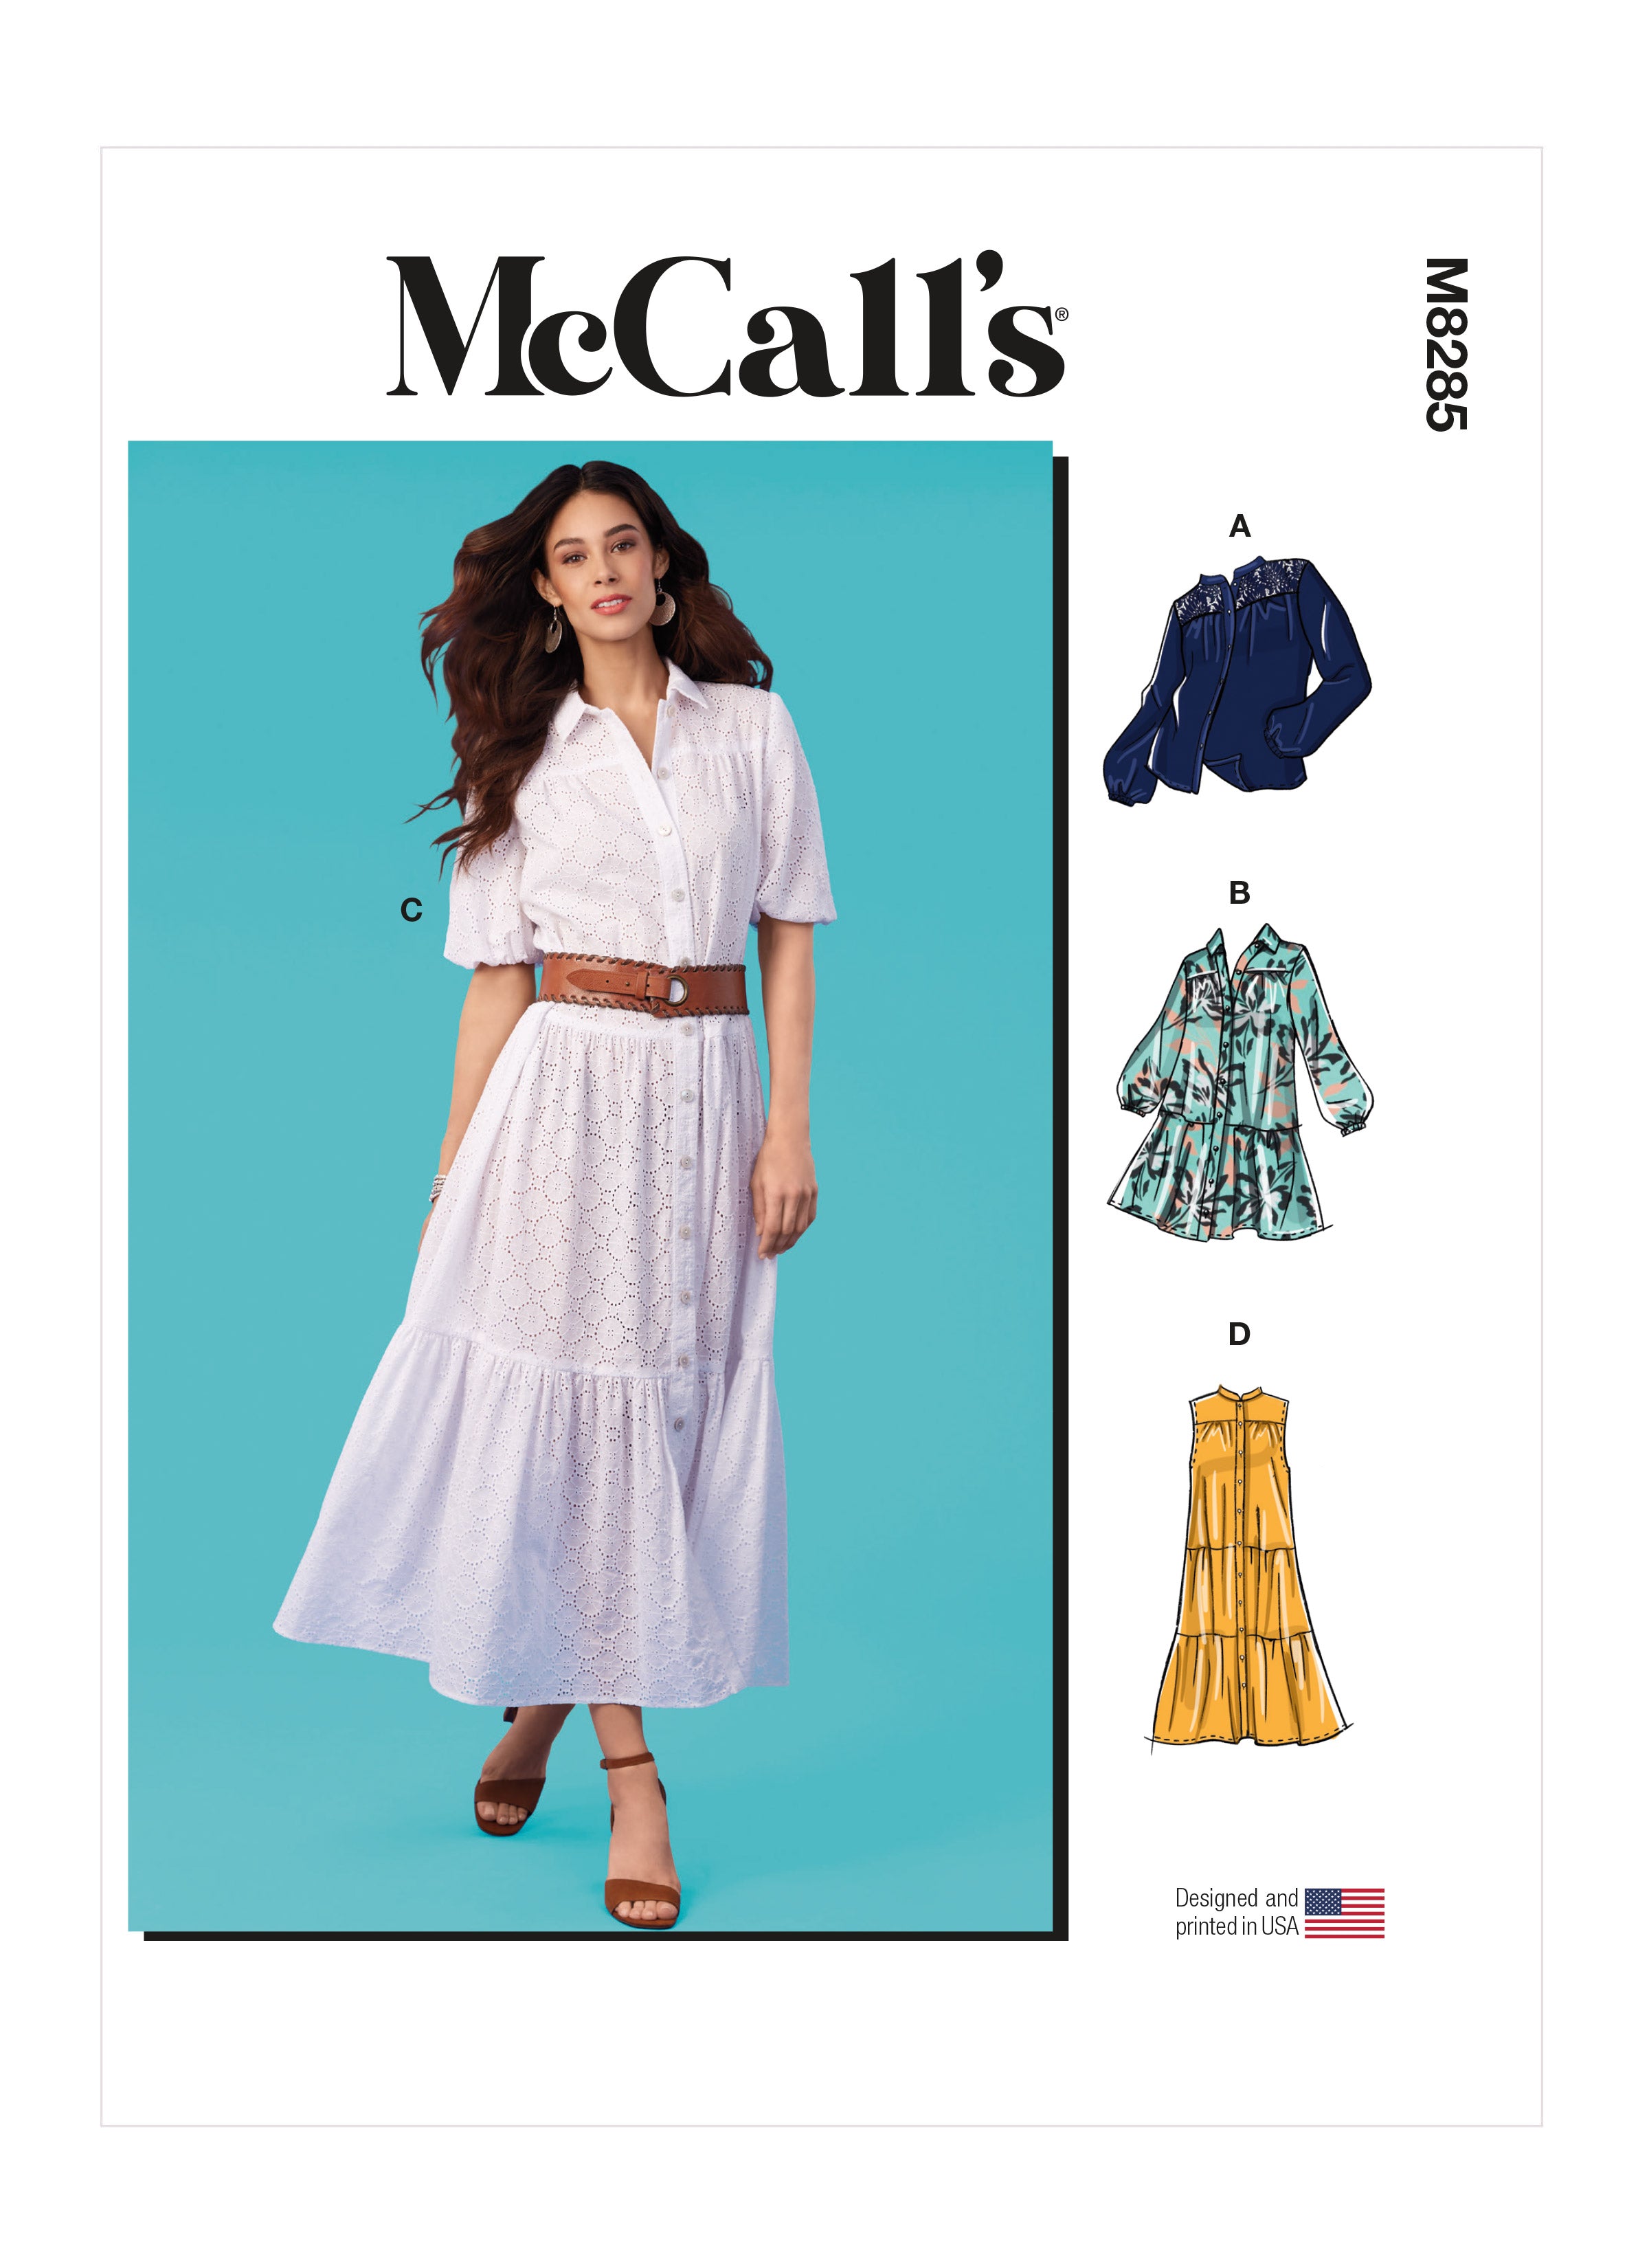 McCalls 8285 Misses' Top and Dresses sewing pattern from Jaycotts Sewing Supplies